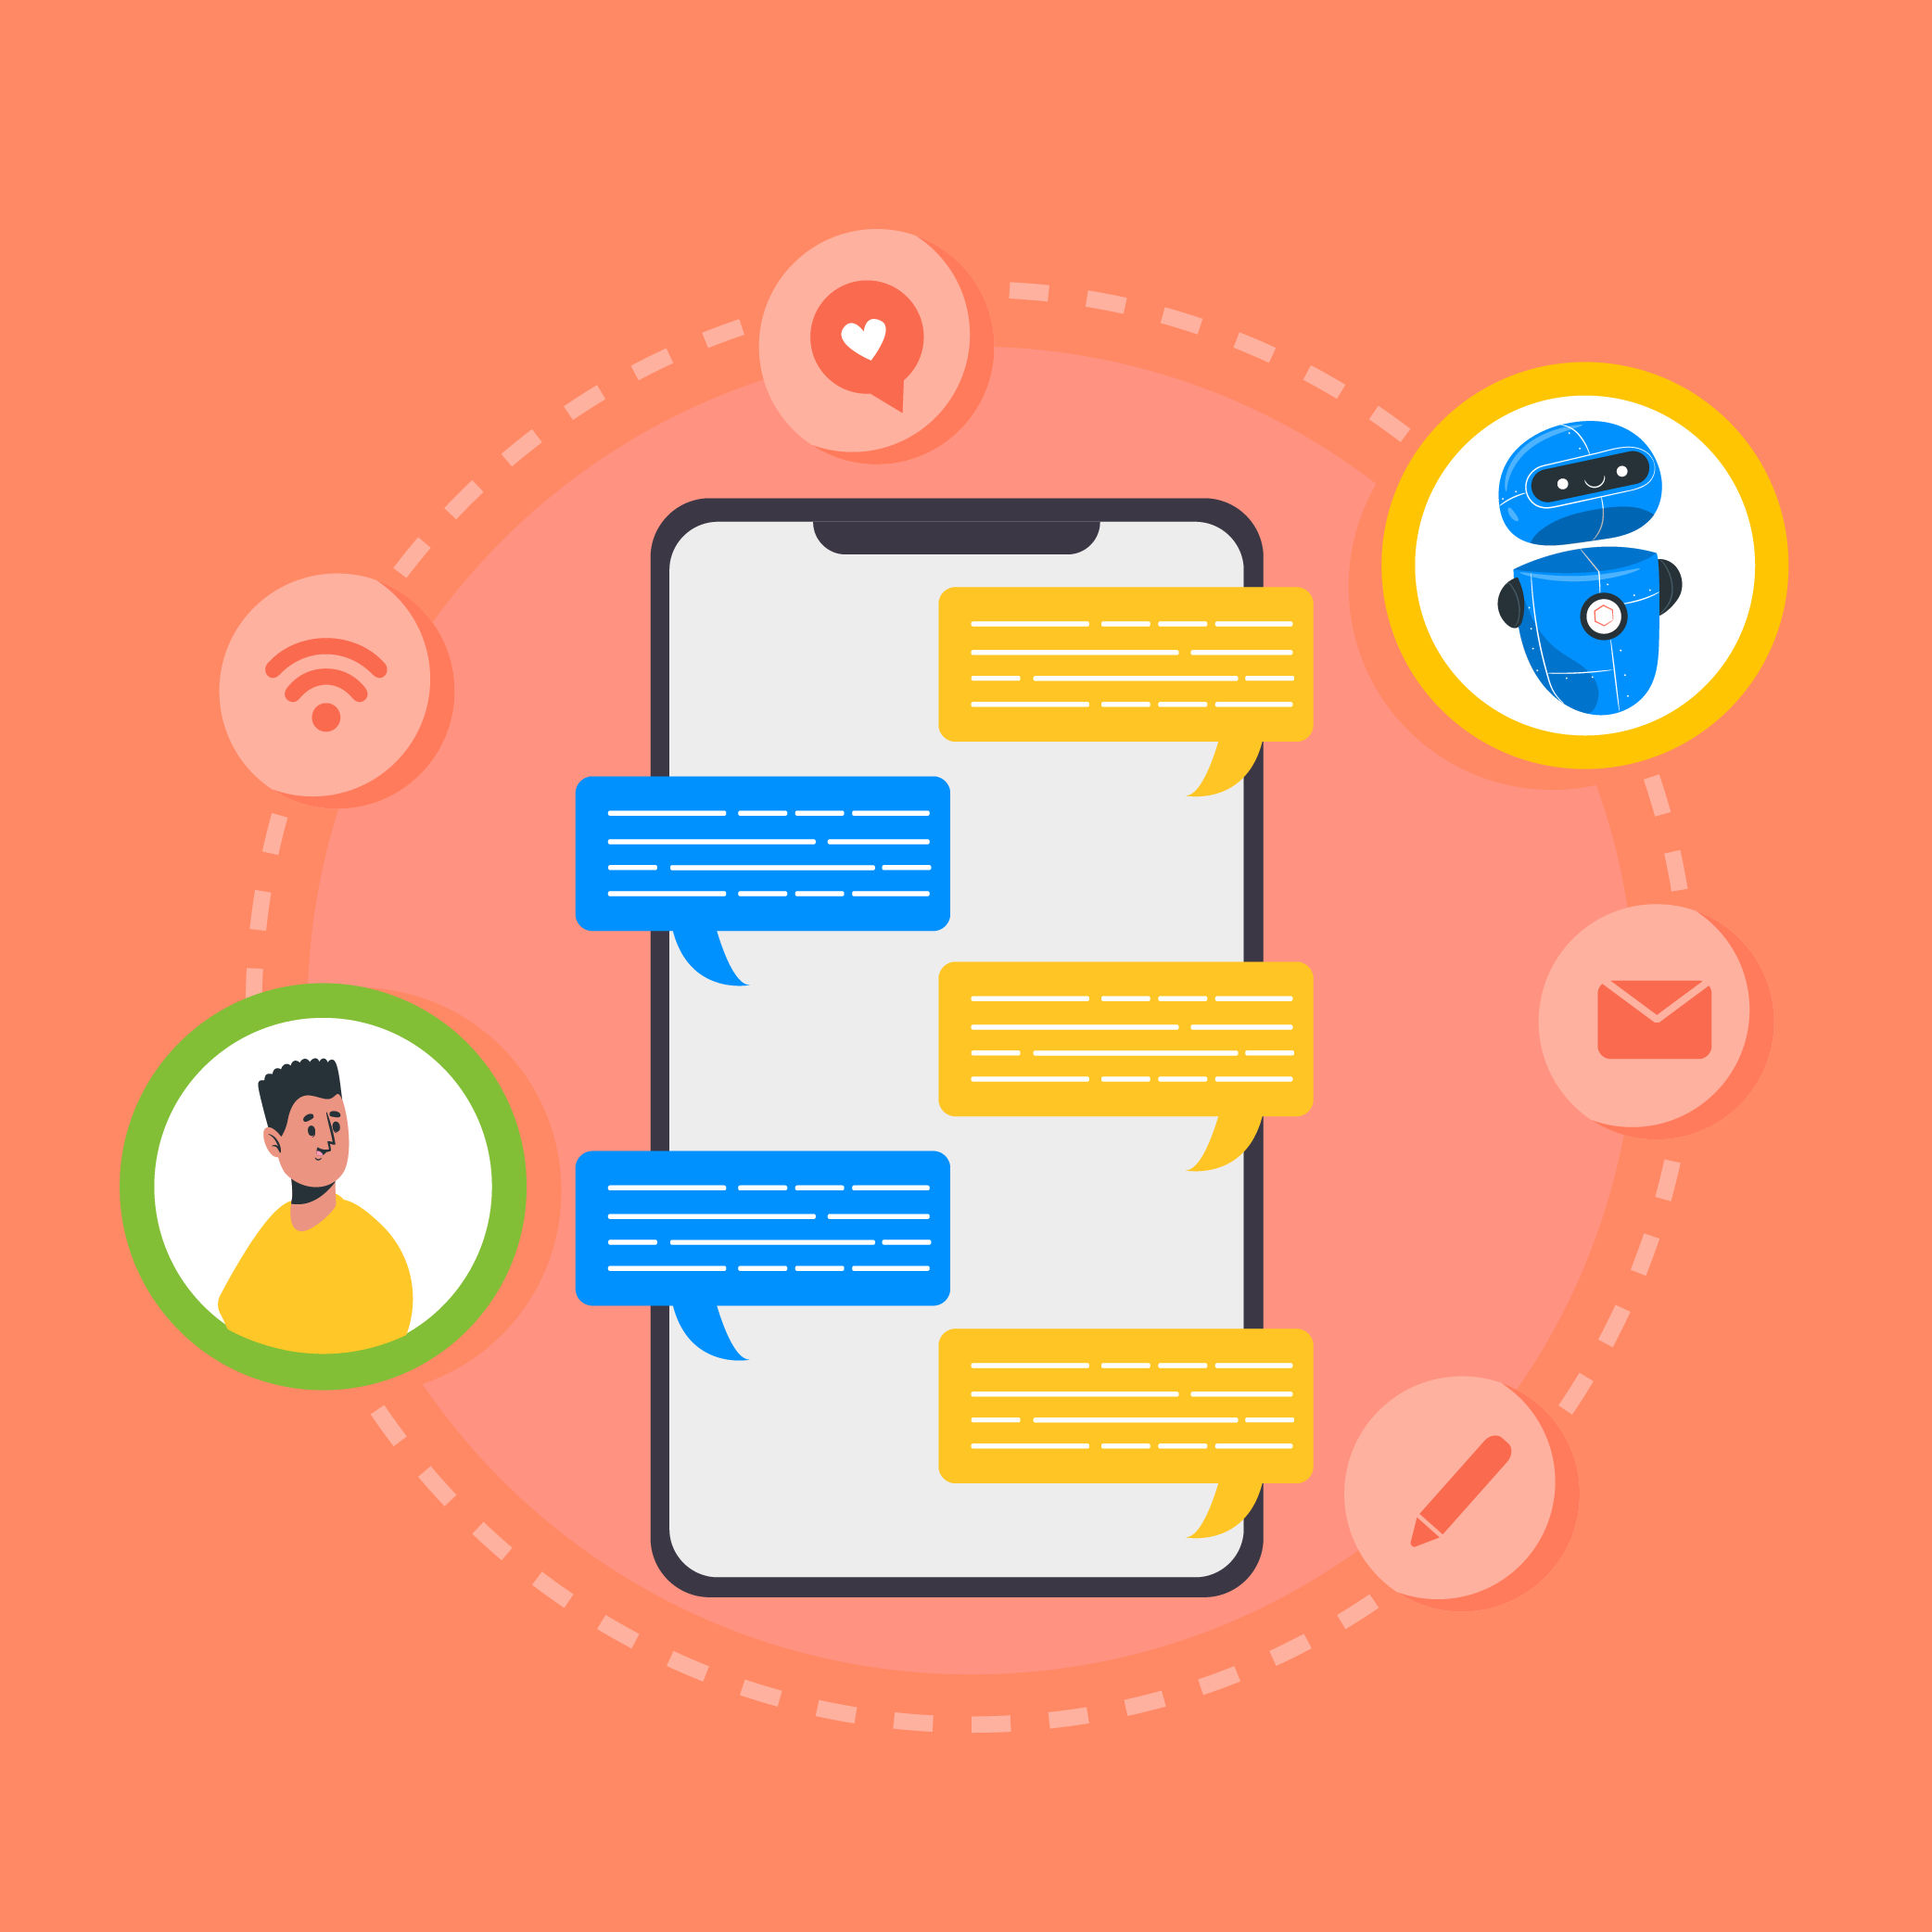 What are the Elements for Interactive Chatbots Building Customer Engagement